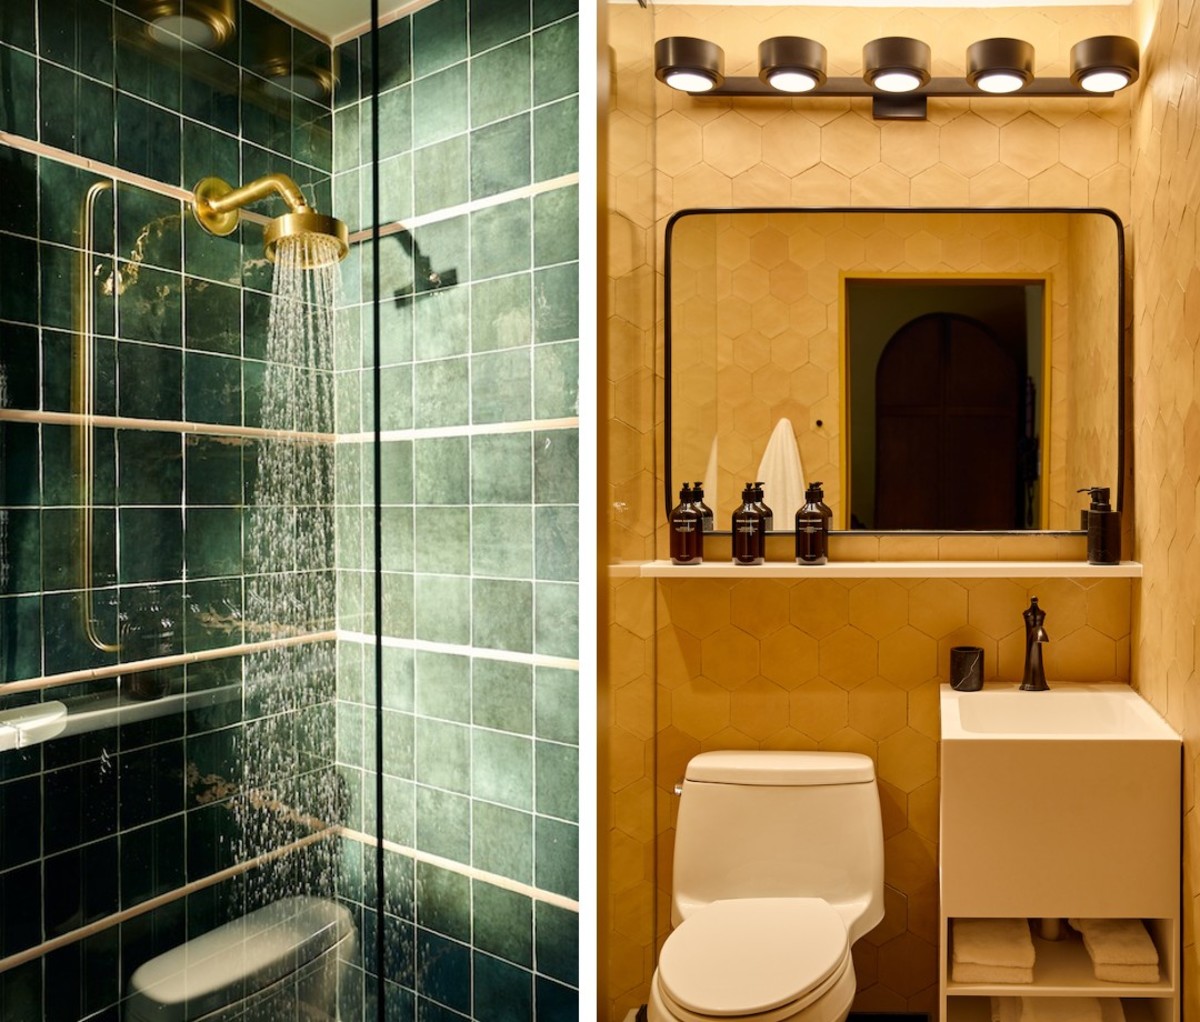 Green tiled shower and yellow tiled bathroom